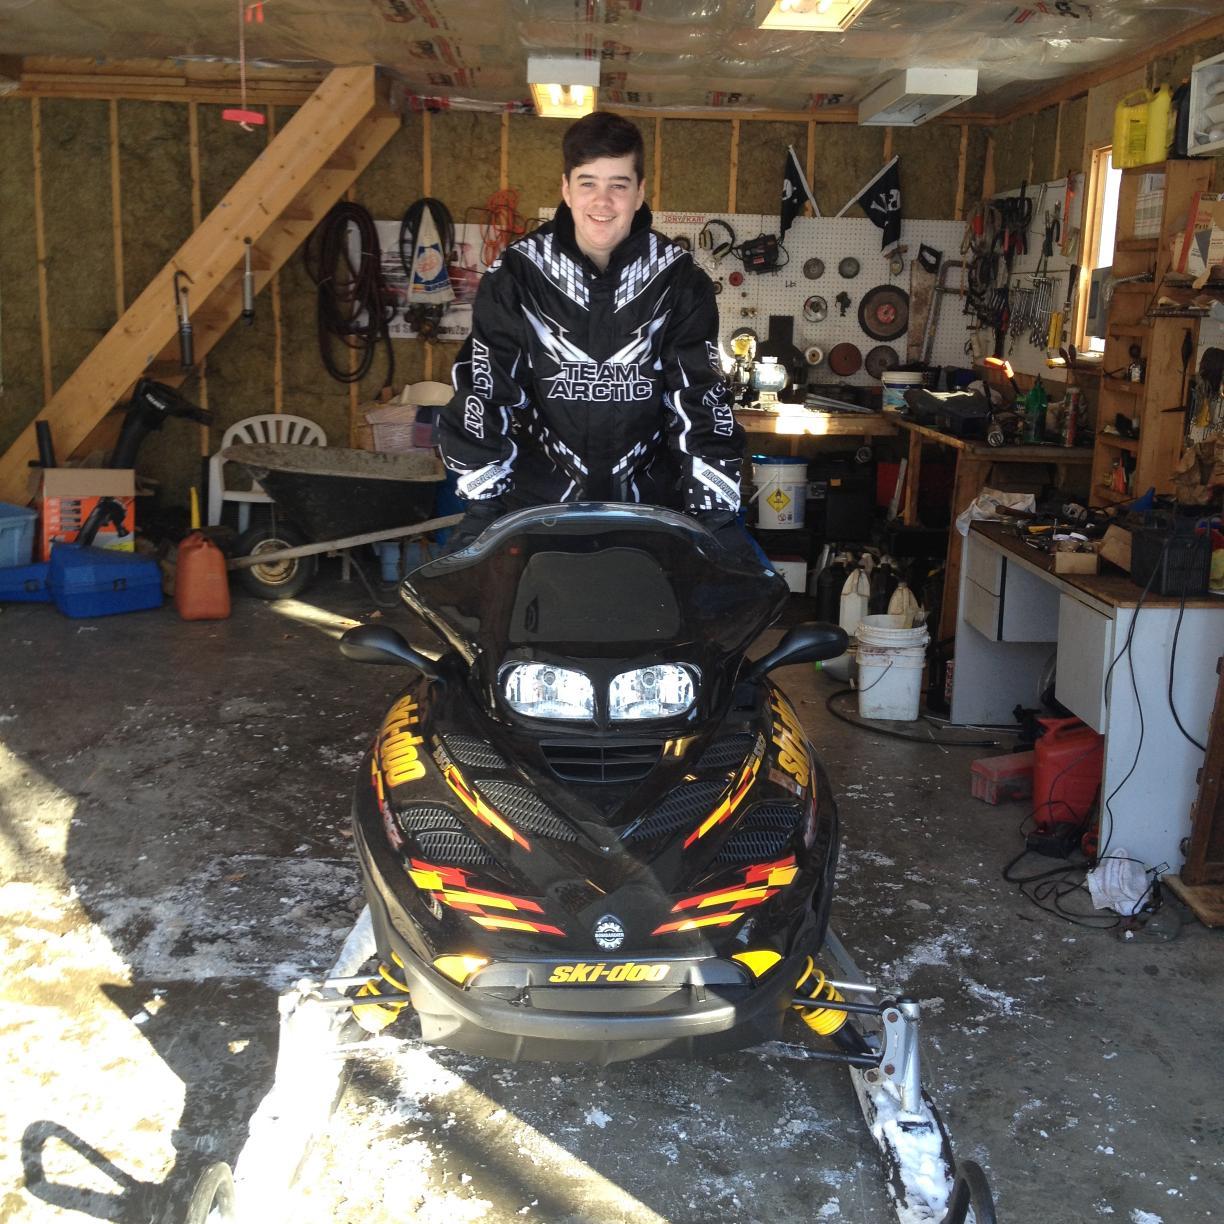 Former gaming channel now changed to snowmobiling. I will be uploading GoPro snowmobiling later this winter so follow me so you dont miss anything. ;)